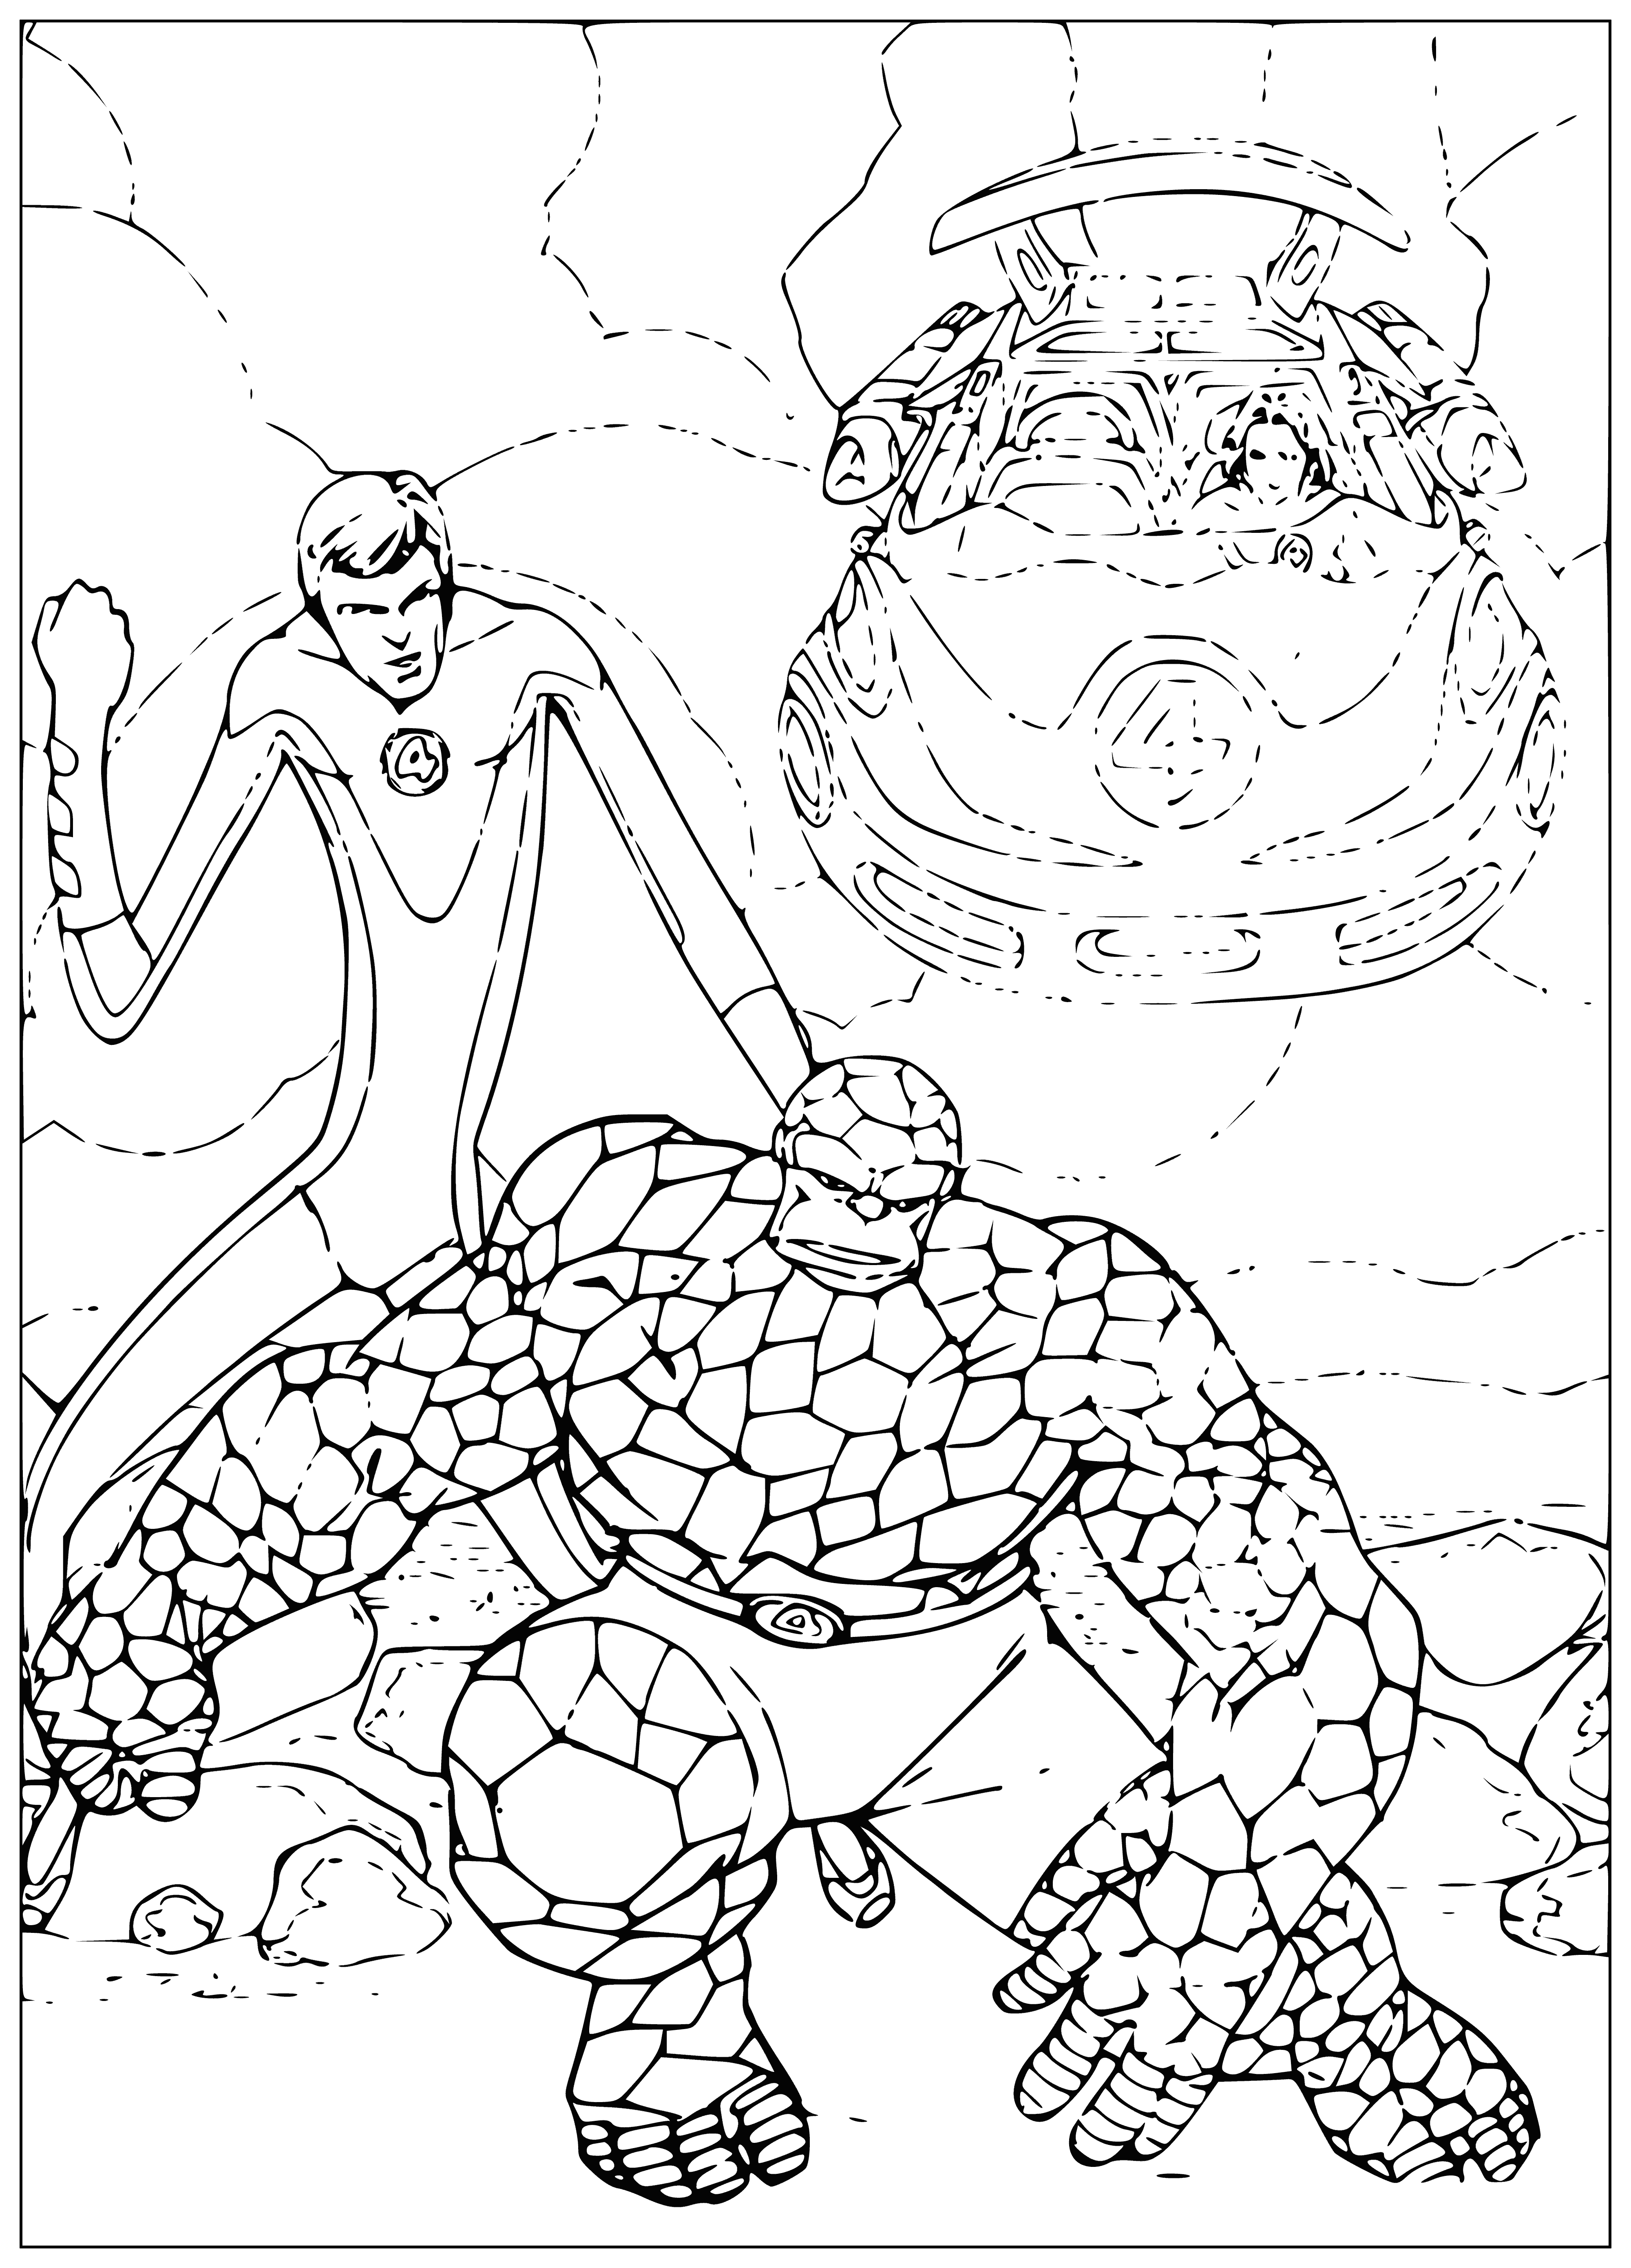 coloring page: Four people are wearing red, blue, & white costumes with a white '4' on the front.